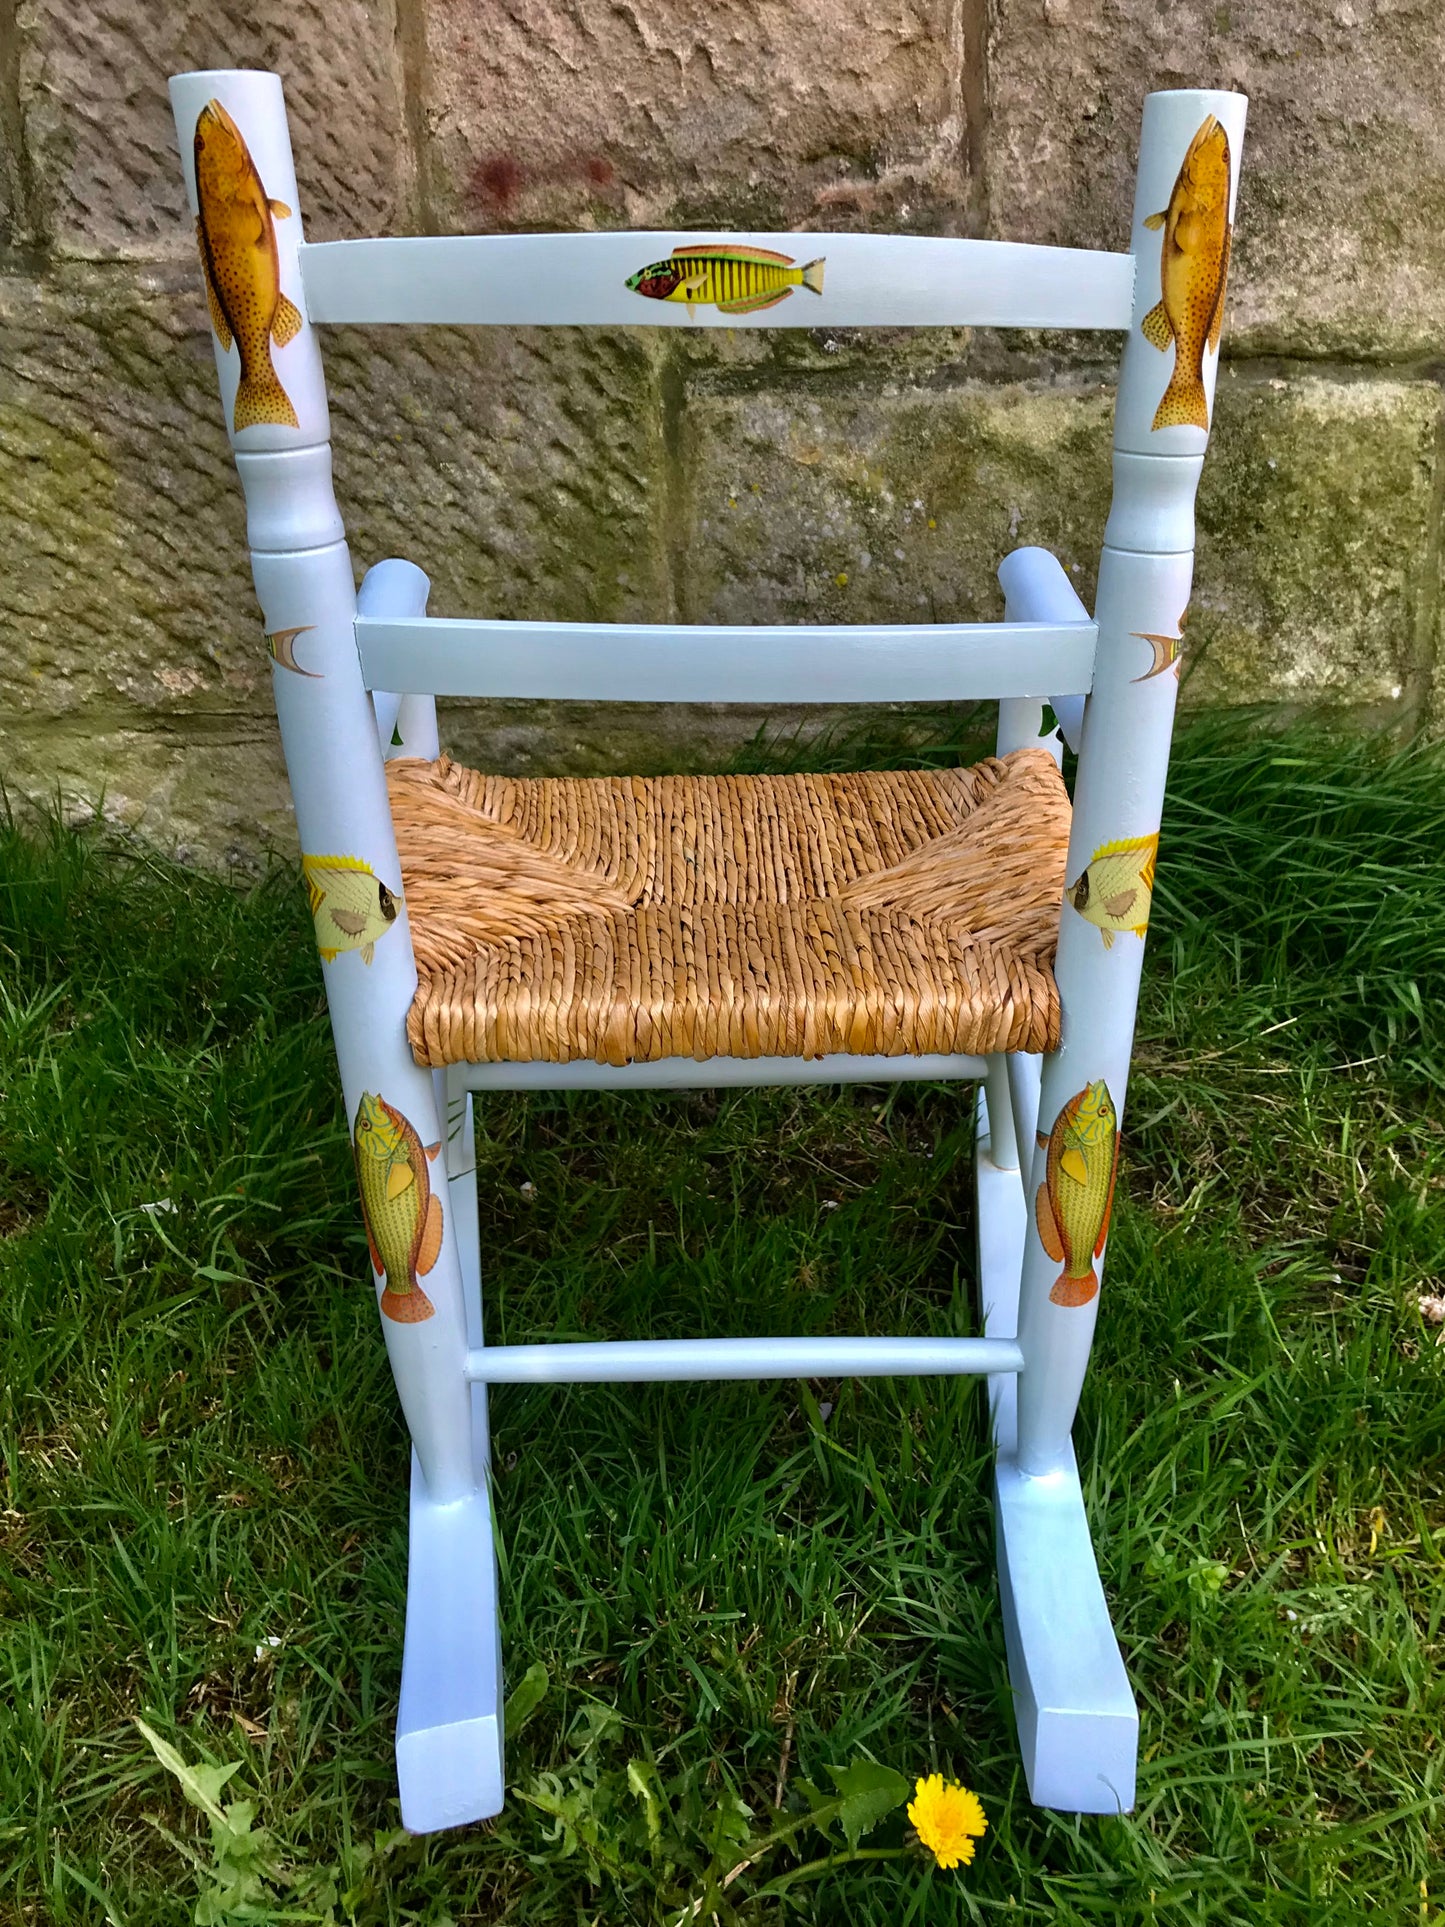 Rush seat / rush rocking chair / wooden school chair / wooden rocking chair Personalised children's chair - Fish  theme - made to order